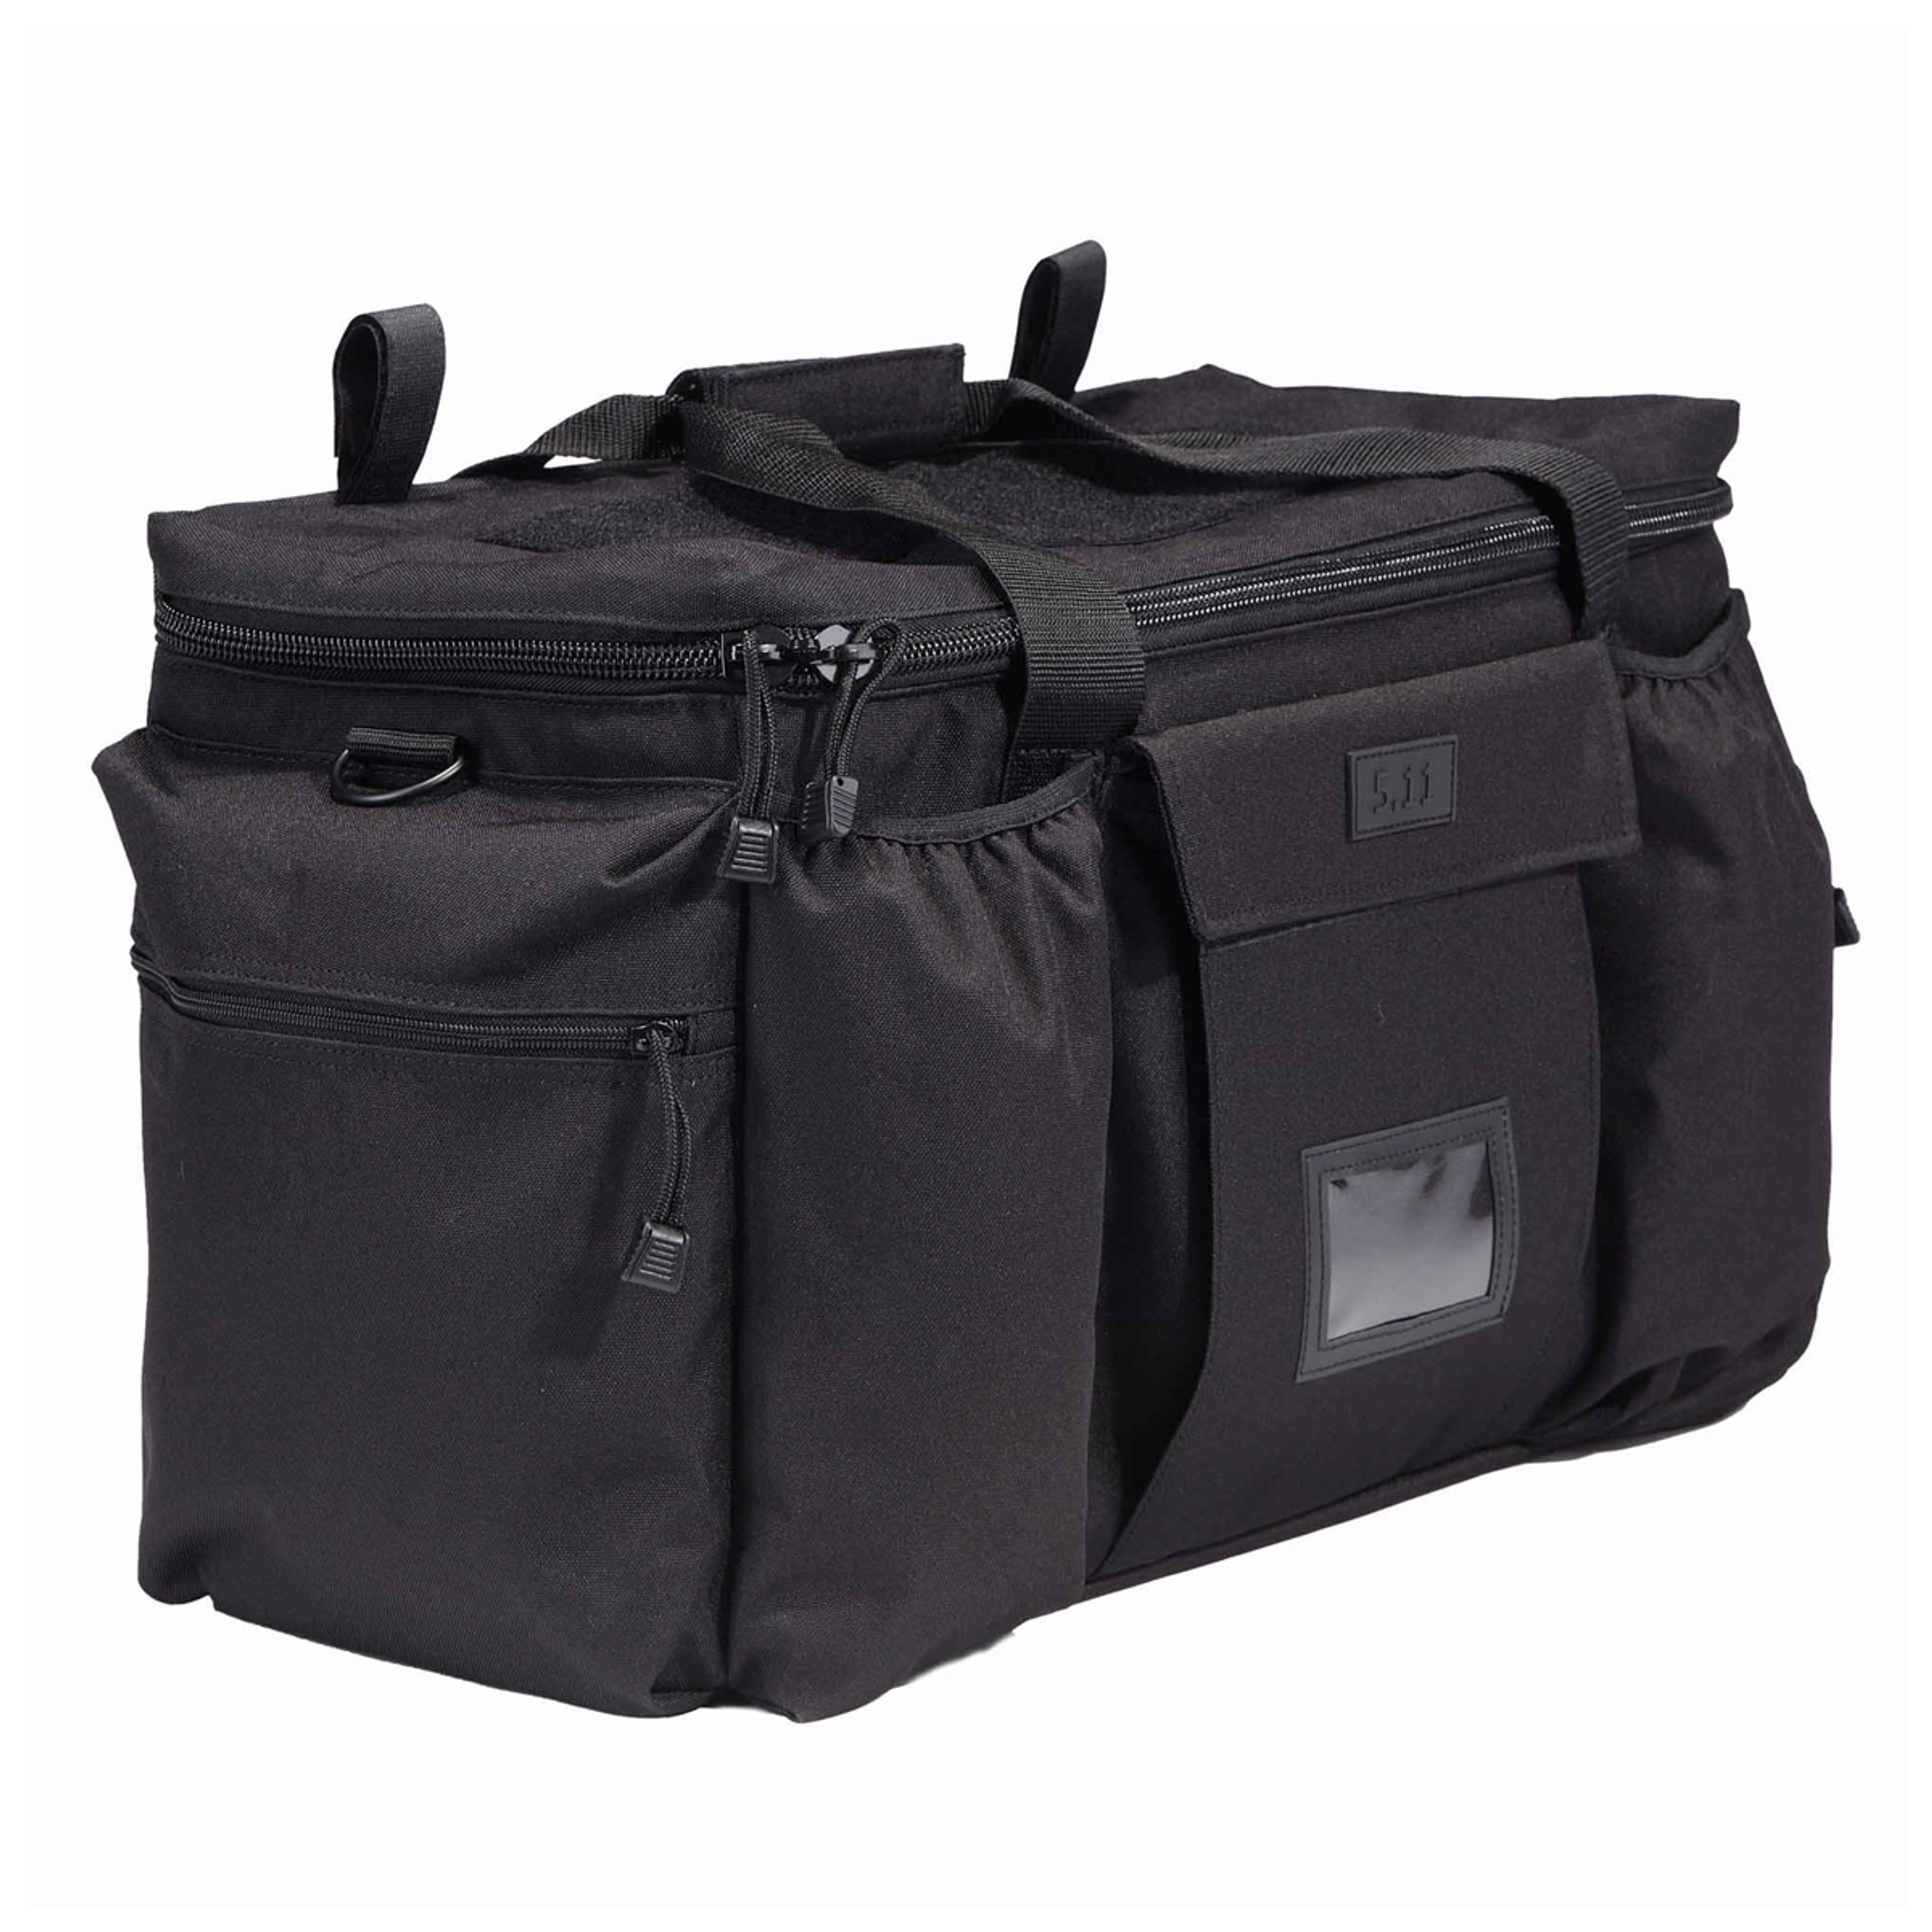 Shop 5.11 Tactical Patrol Ready Bag for police